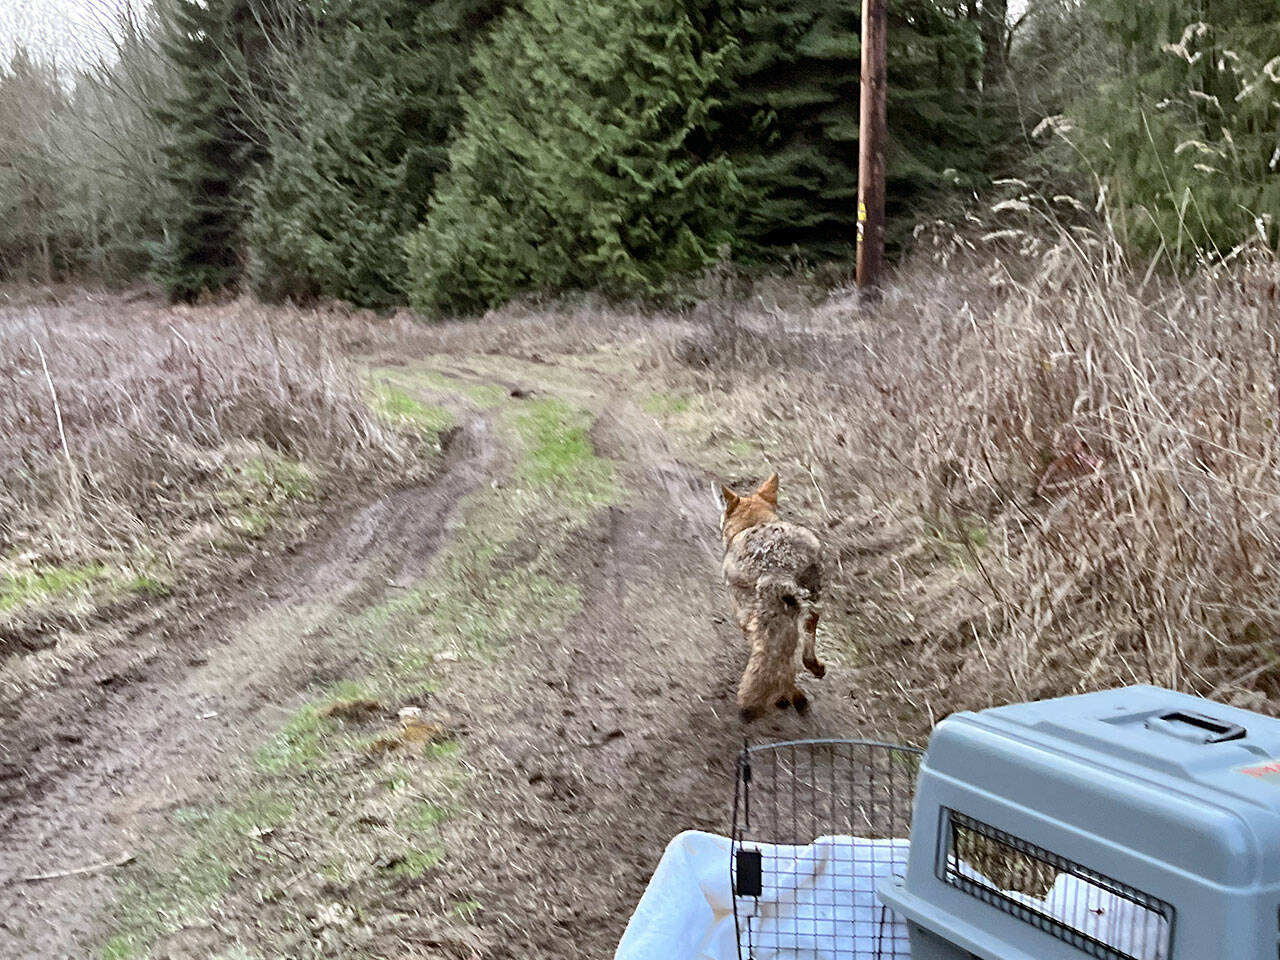 A coyote treated by Center Valley Animal Rescue after the animal injured itself at Jefferson Healthcare is released into the wild. (Center Valley Animal Rescue)